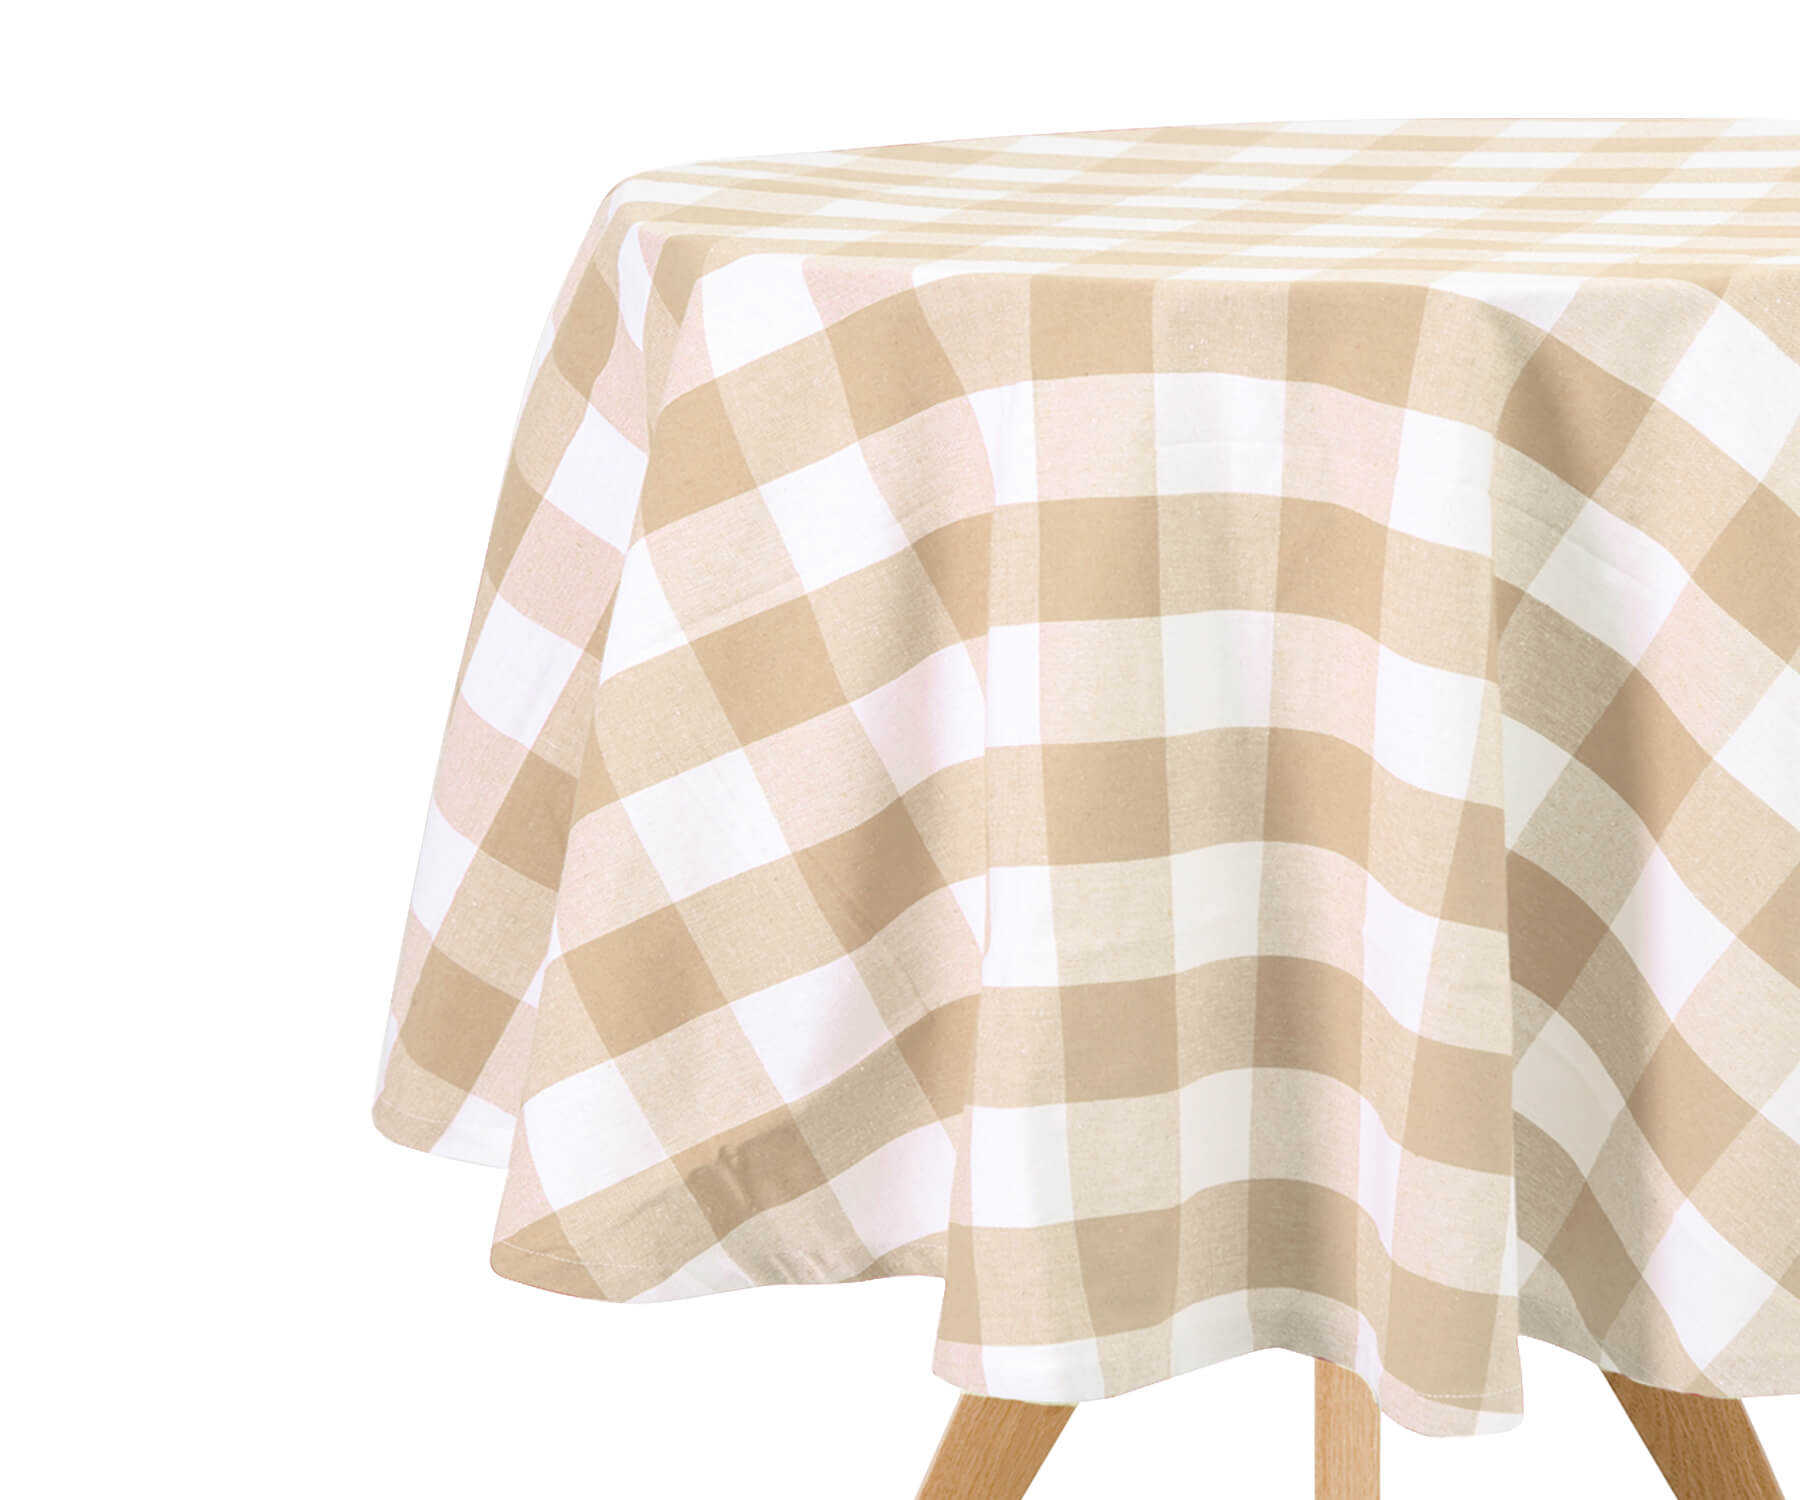 The cotton tablecloth round has mitered corners which gives it durability, and a neat look, and comfortably seats 4-6 people.